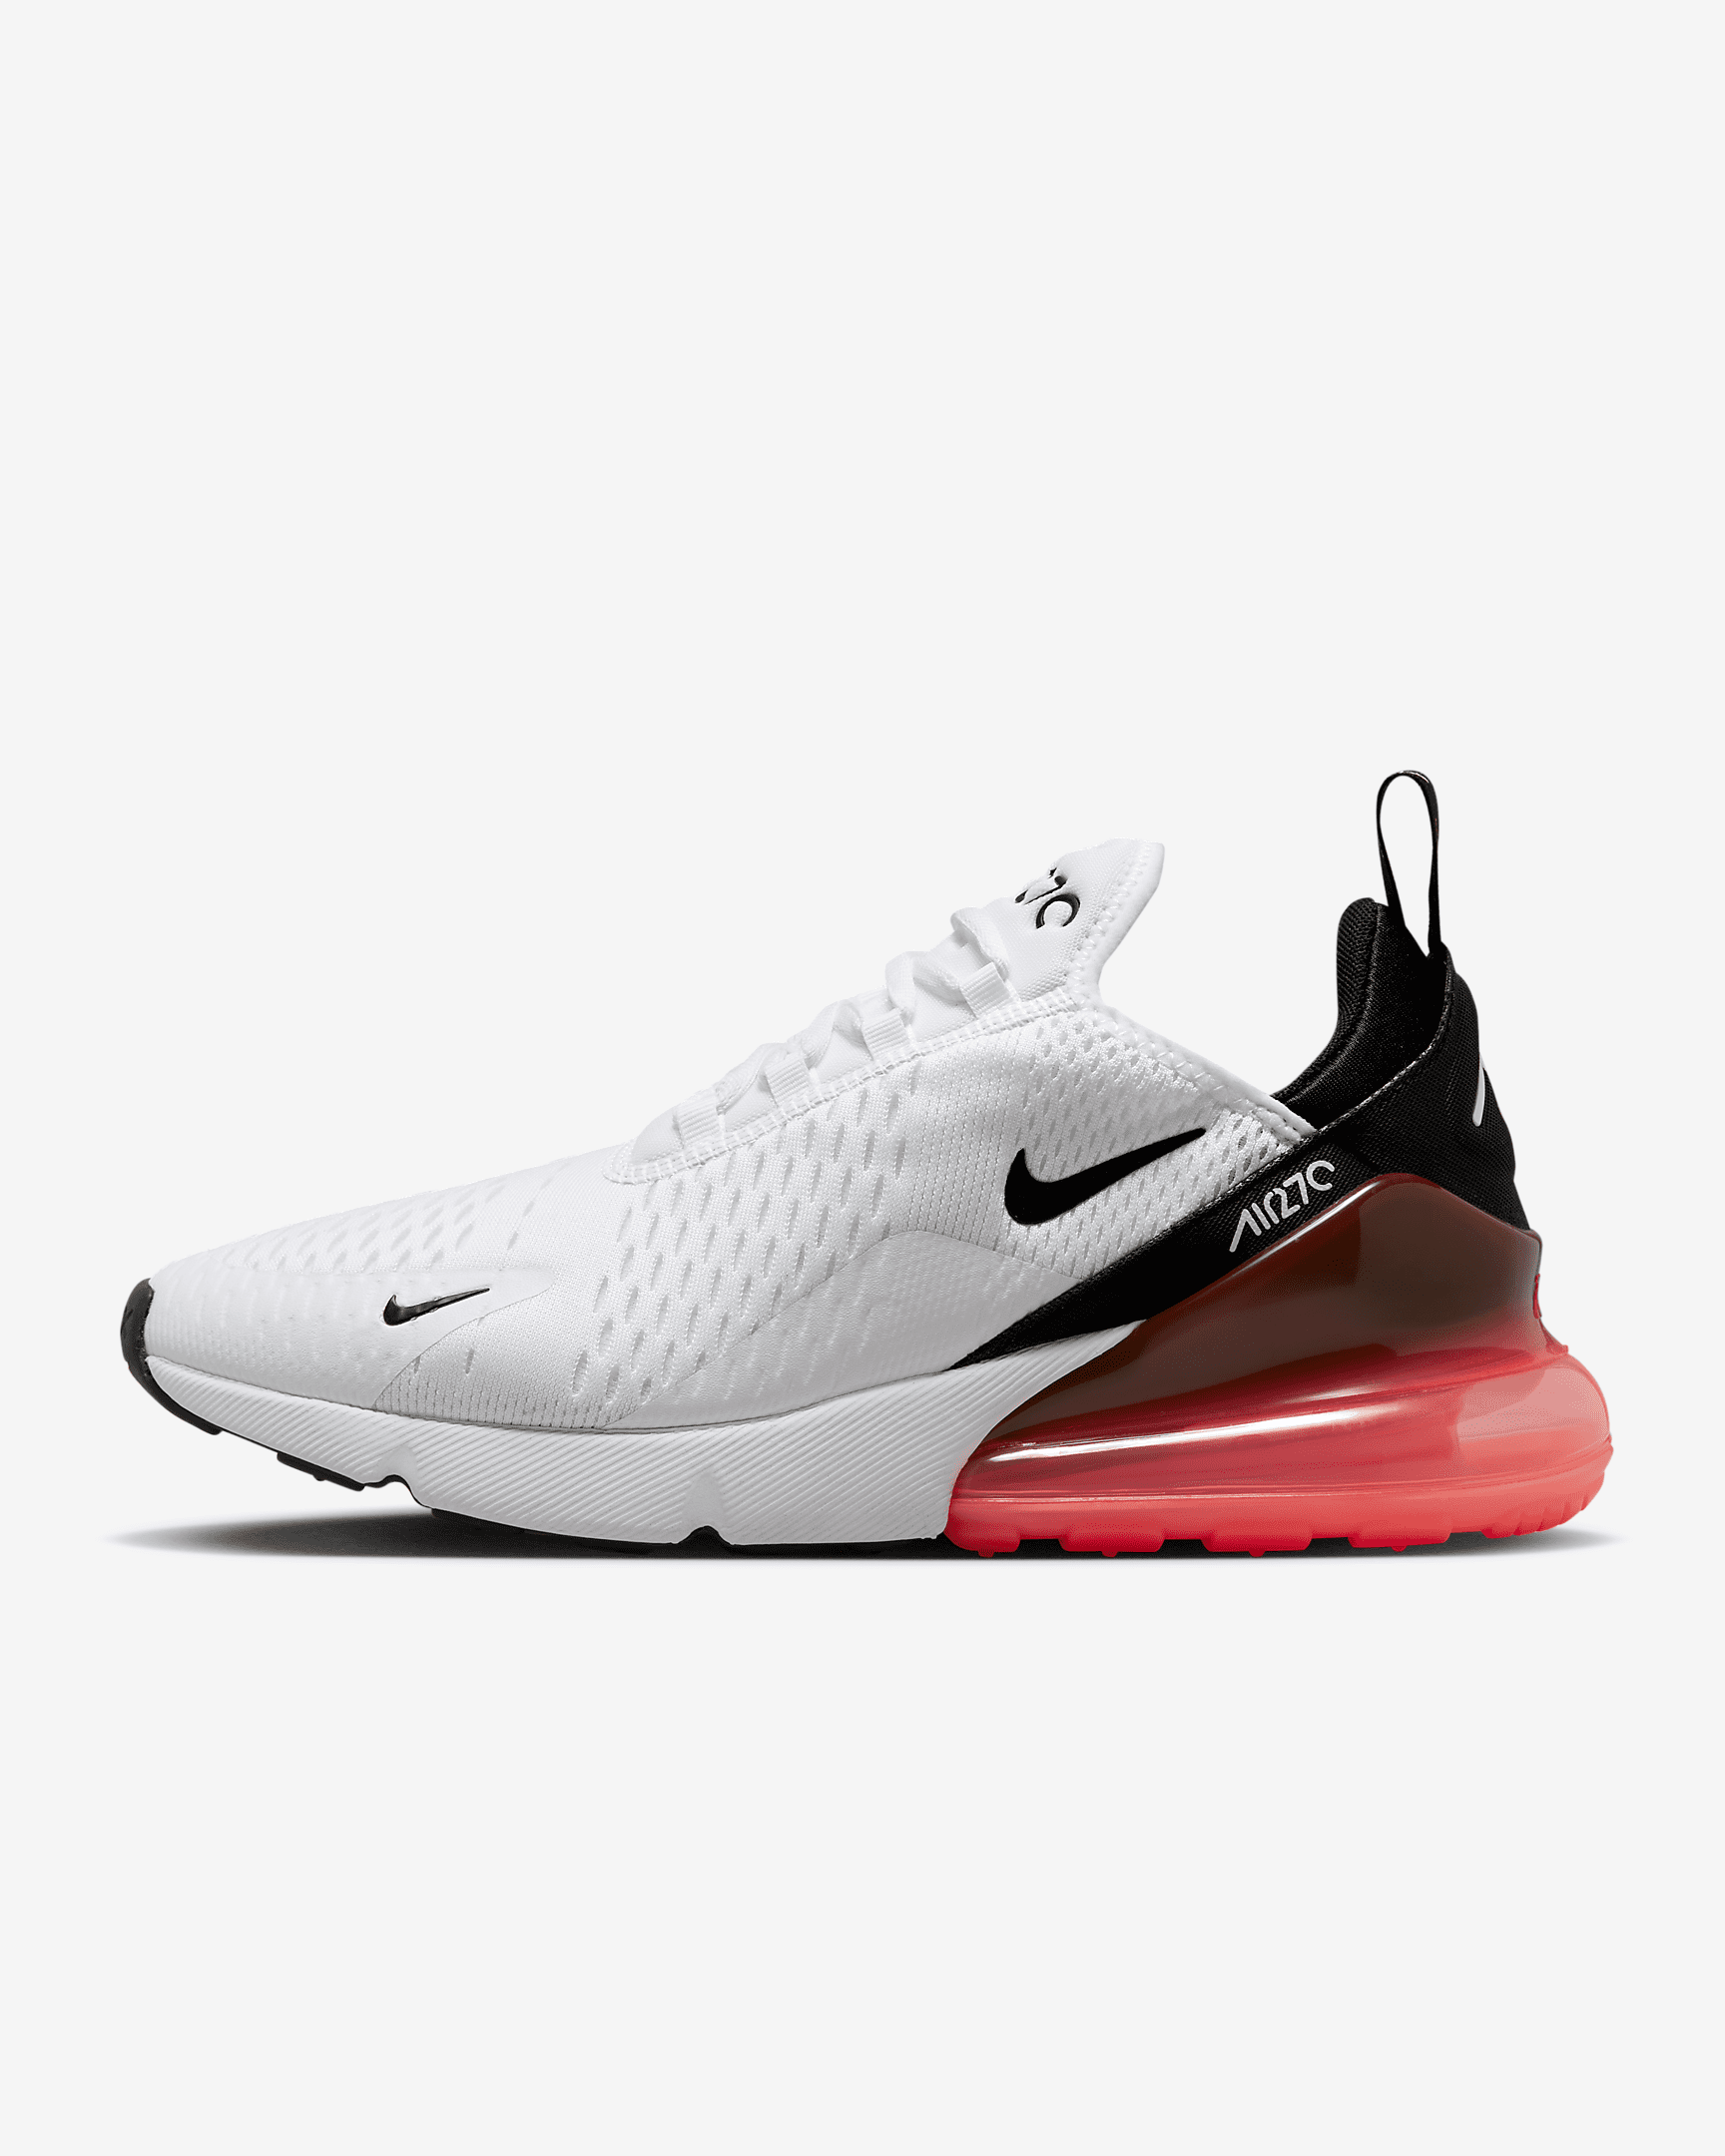 size 7 men's nike air max 270 shoes